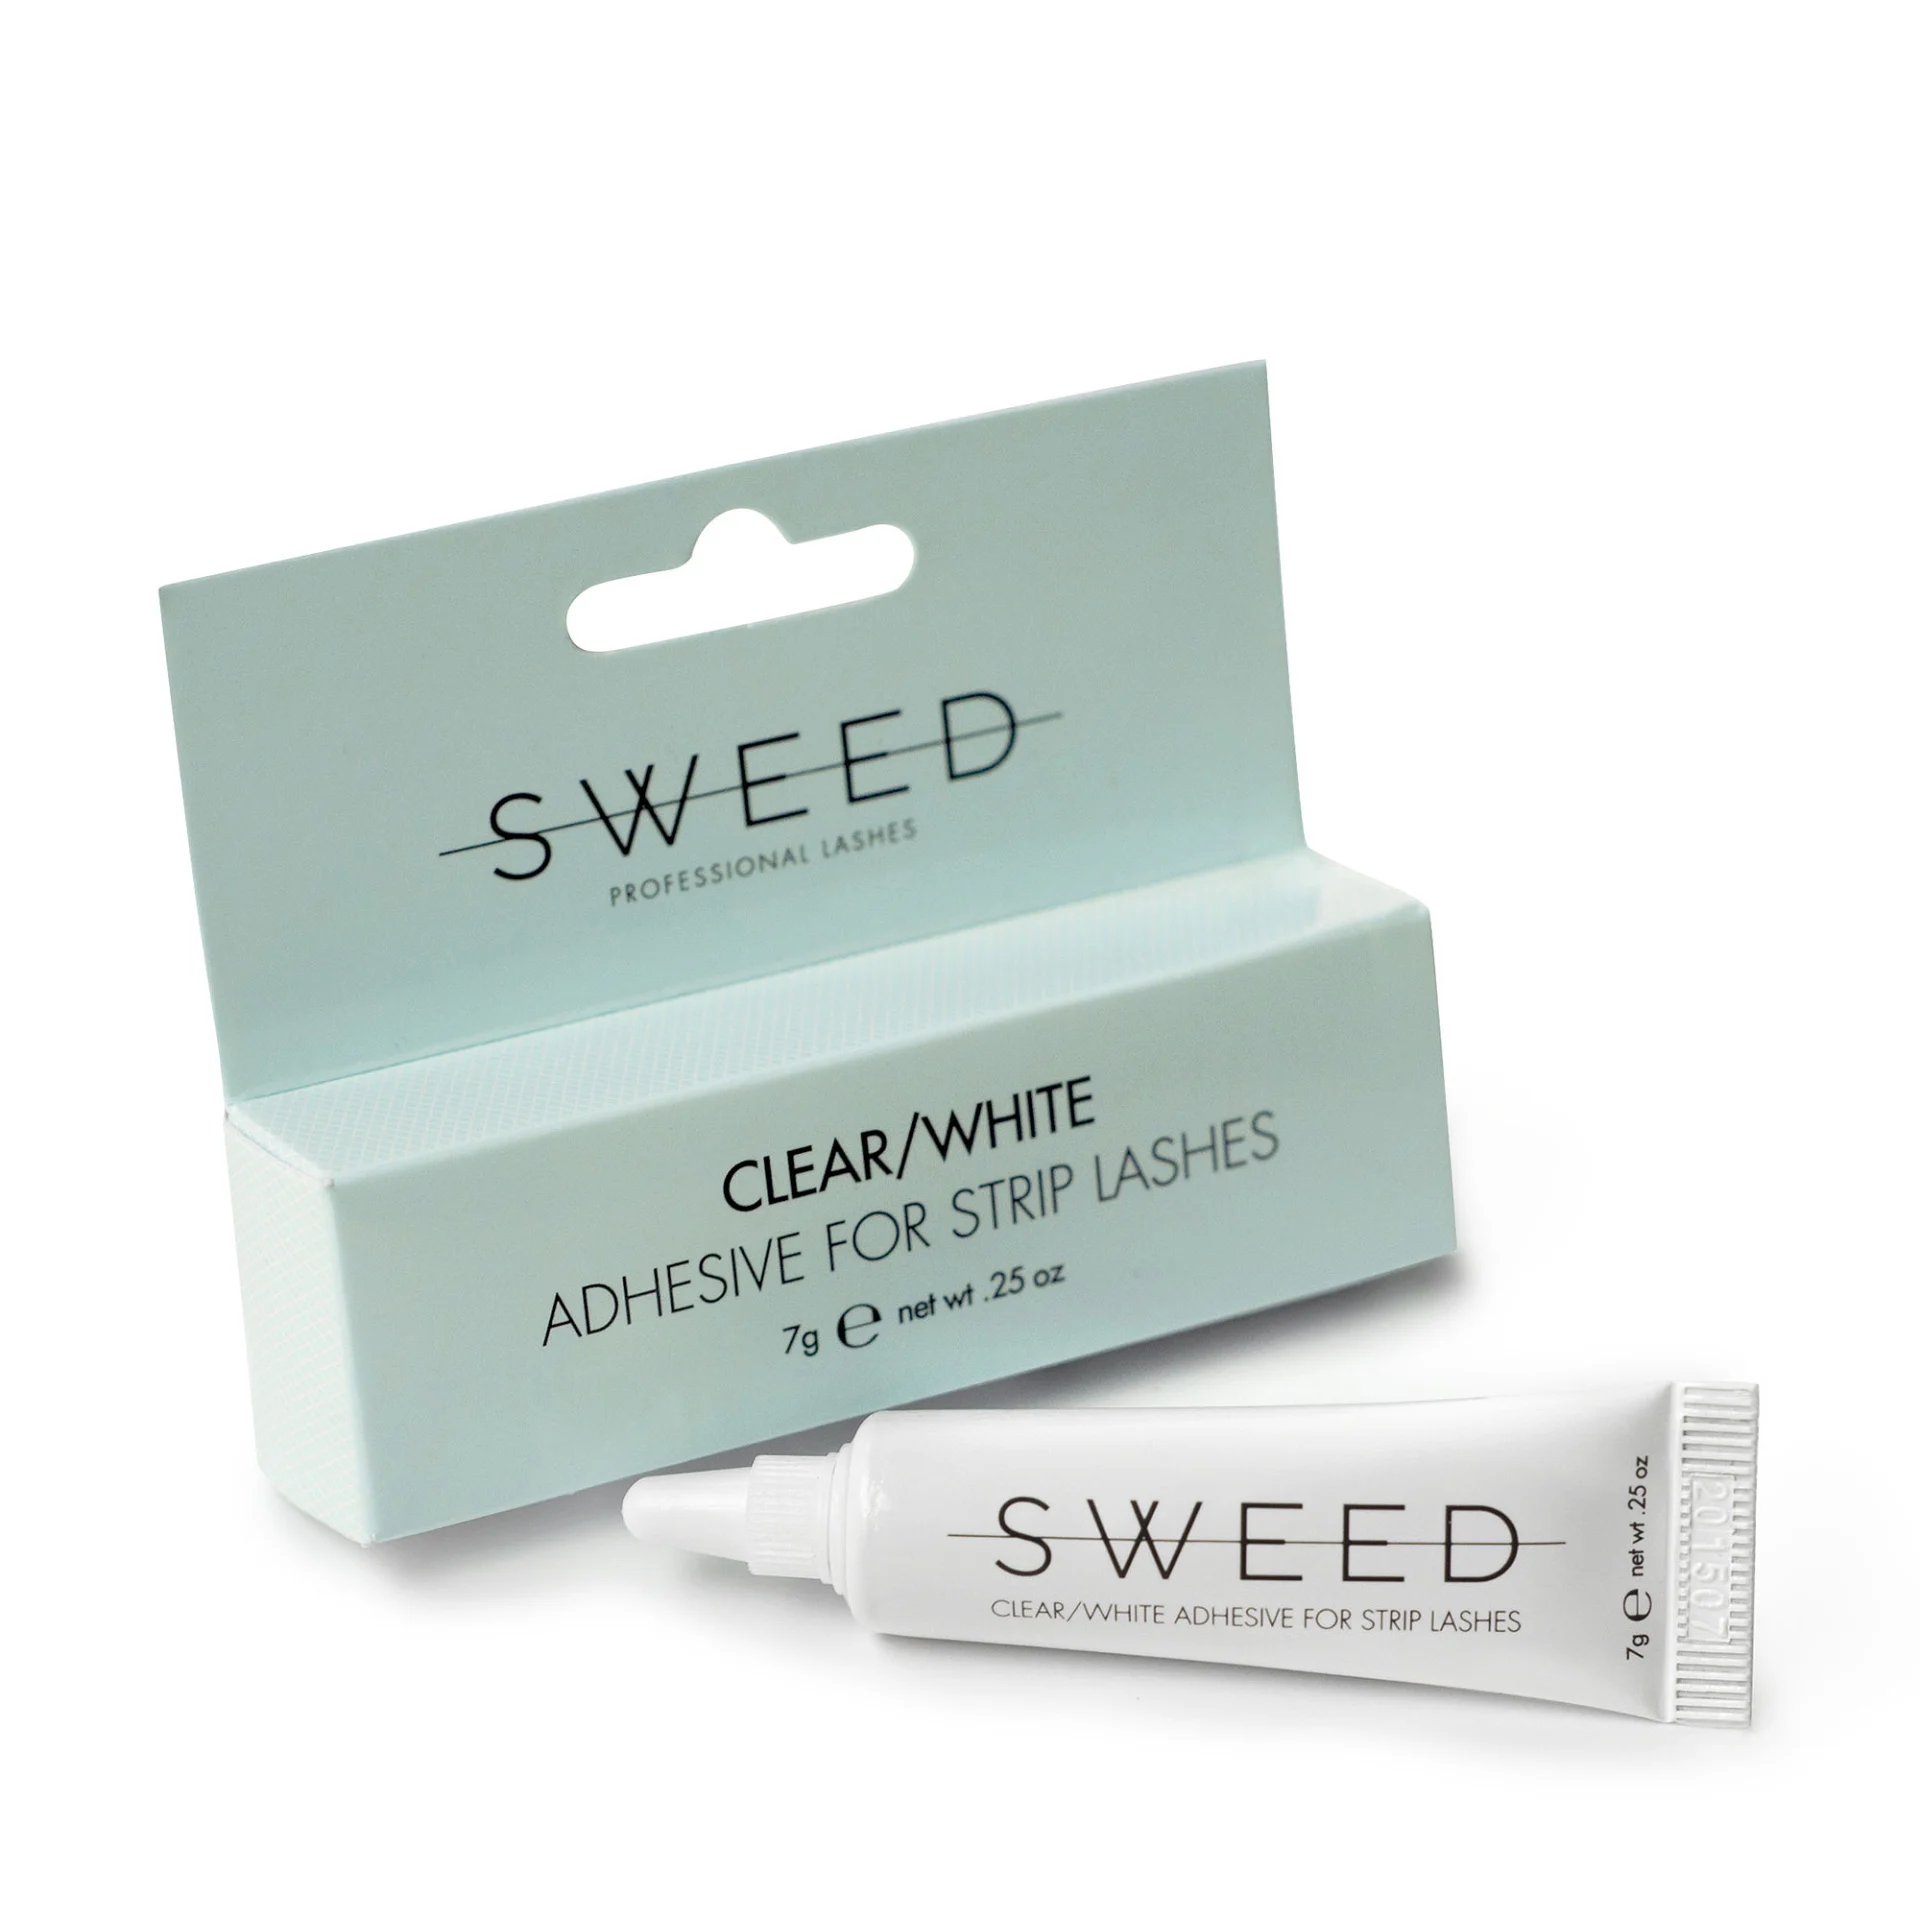 Clear/White Adhesive For Strip Lashes